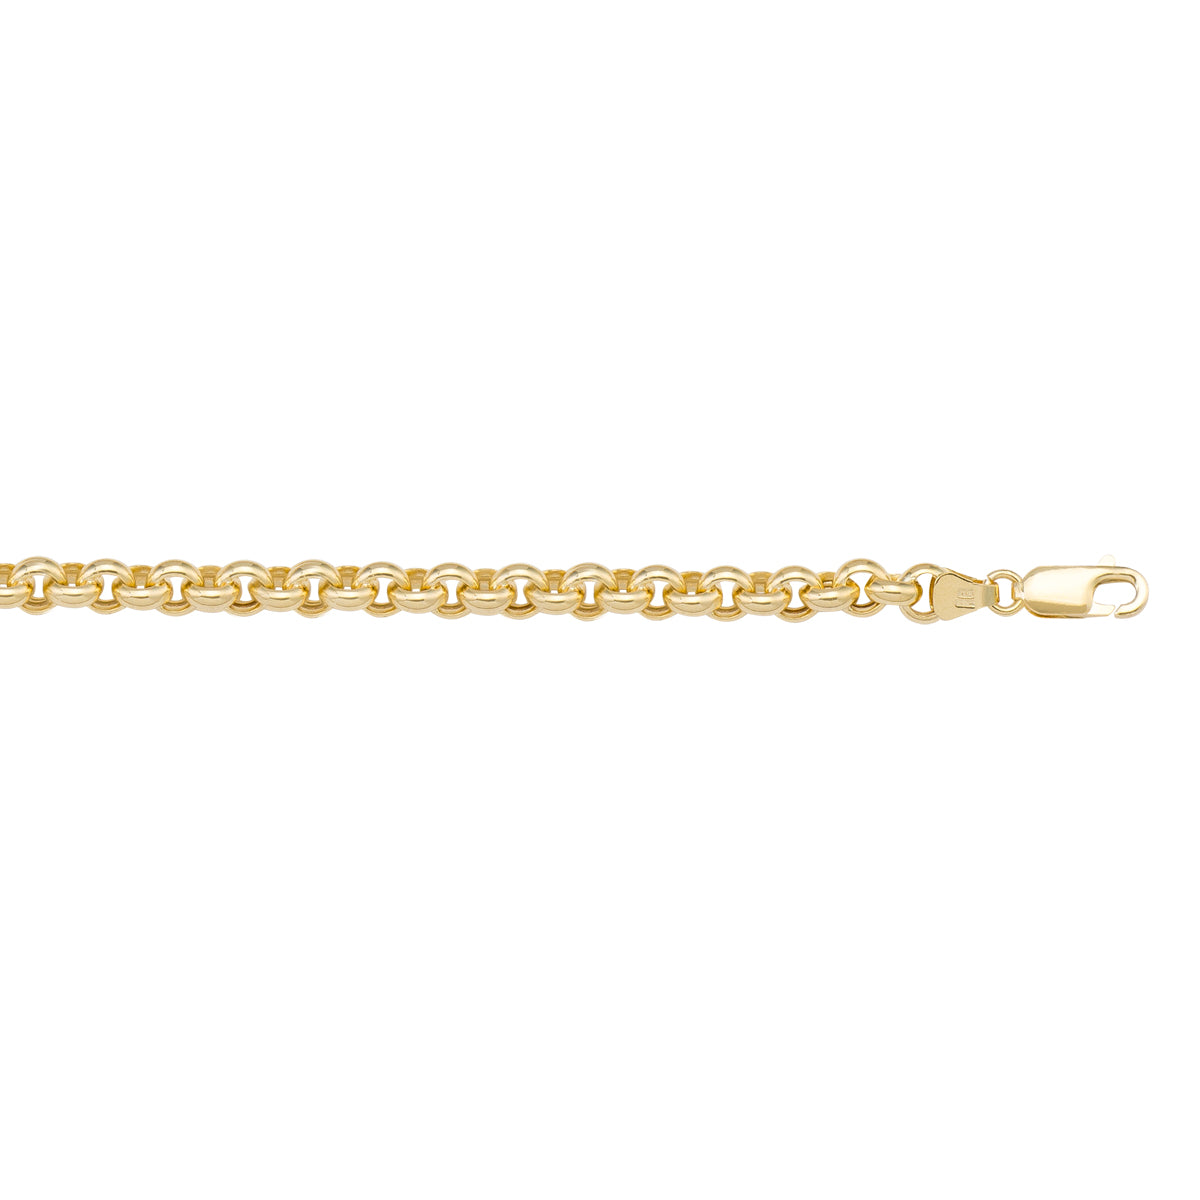 BRACELETS YELLOW GOLD HOLLOW ROLO LINK CHAIN